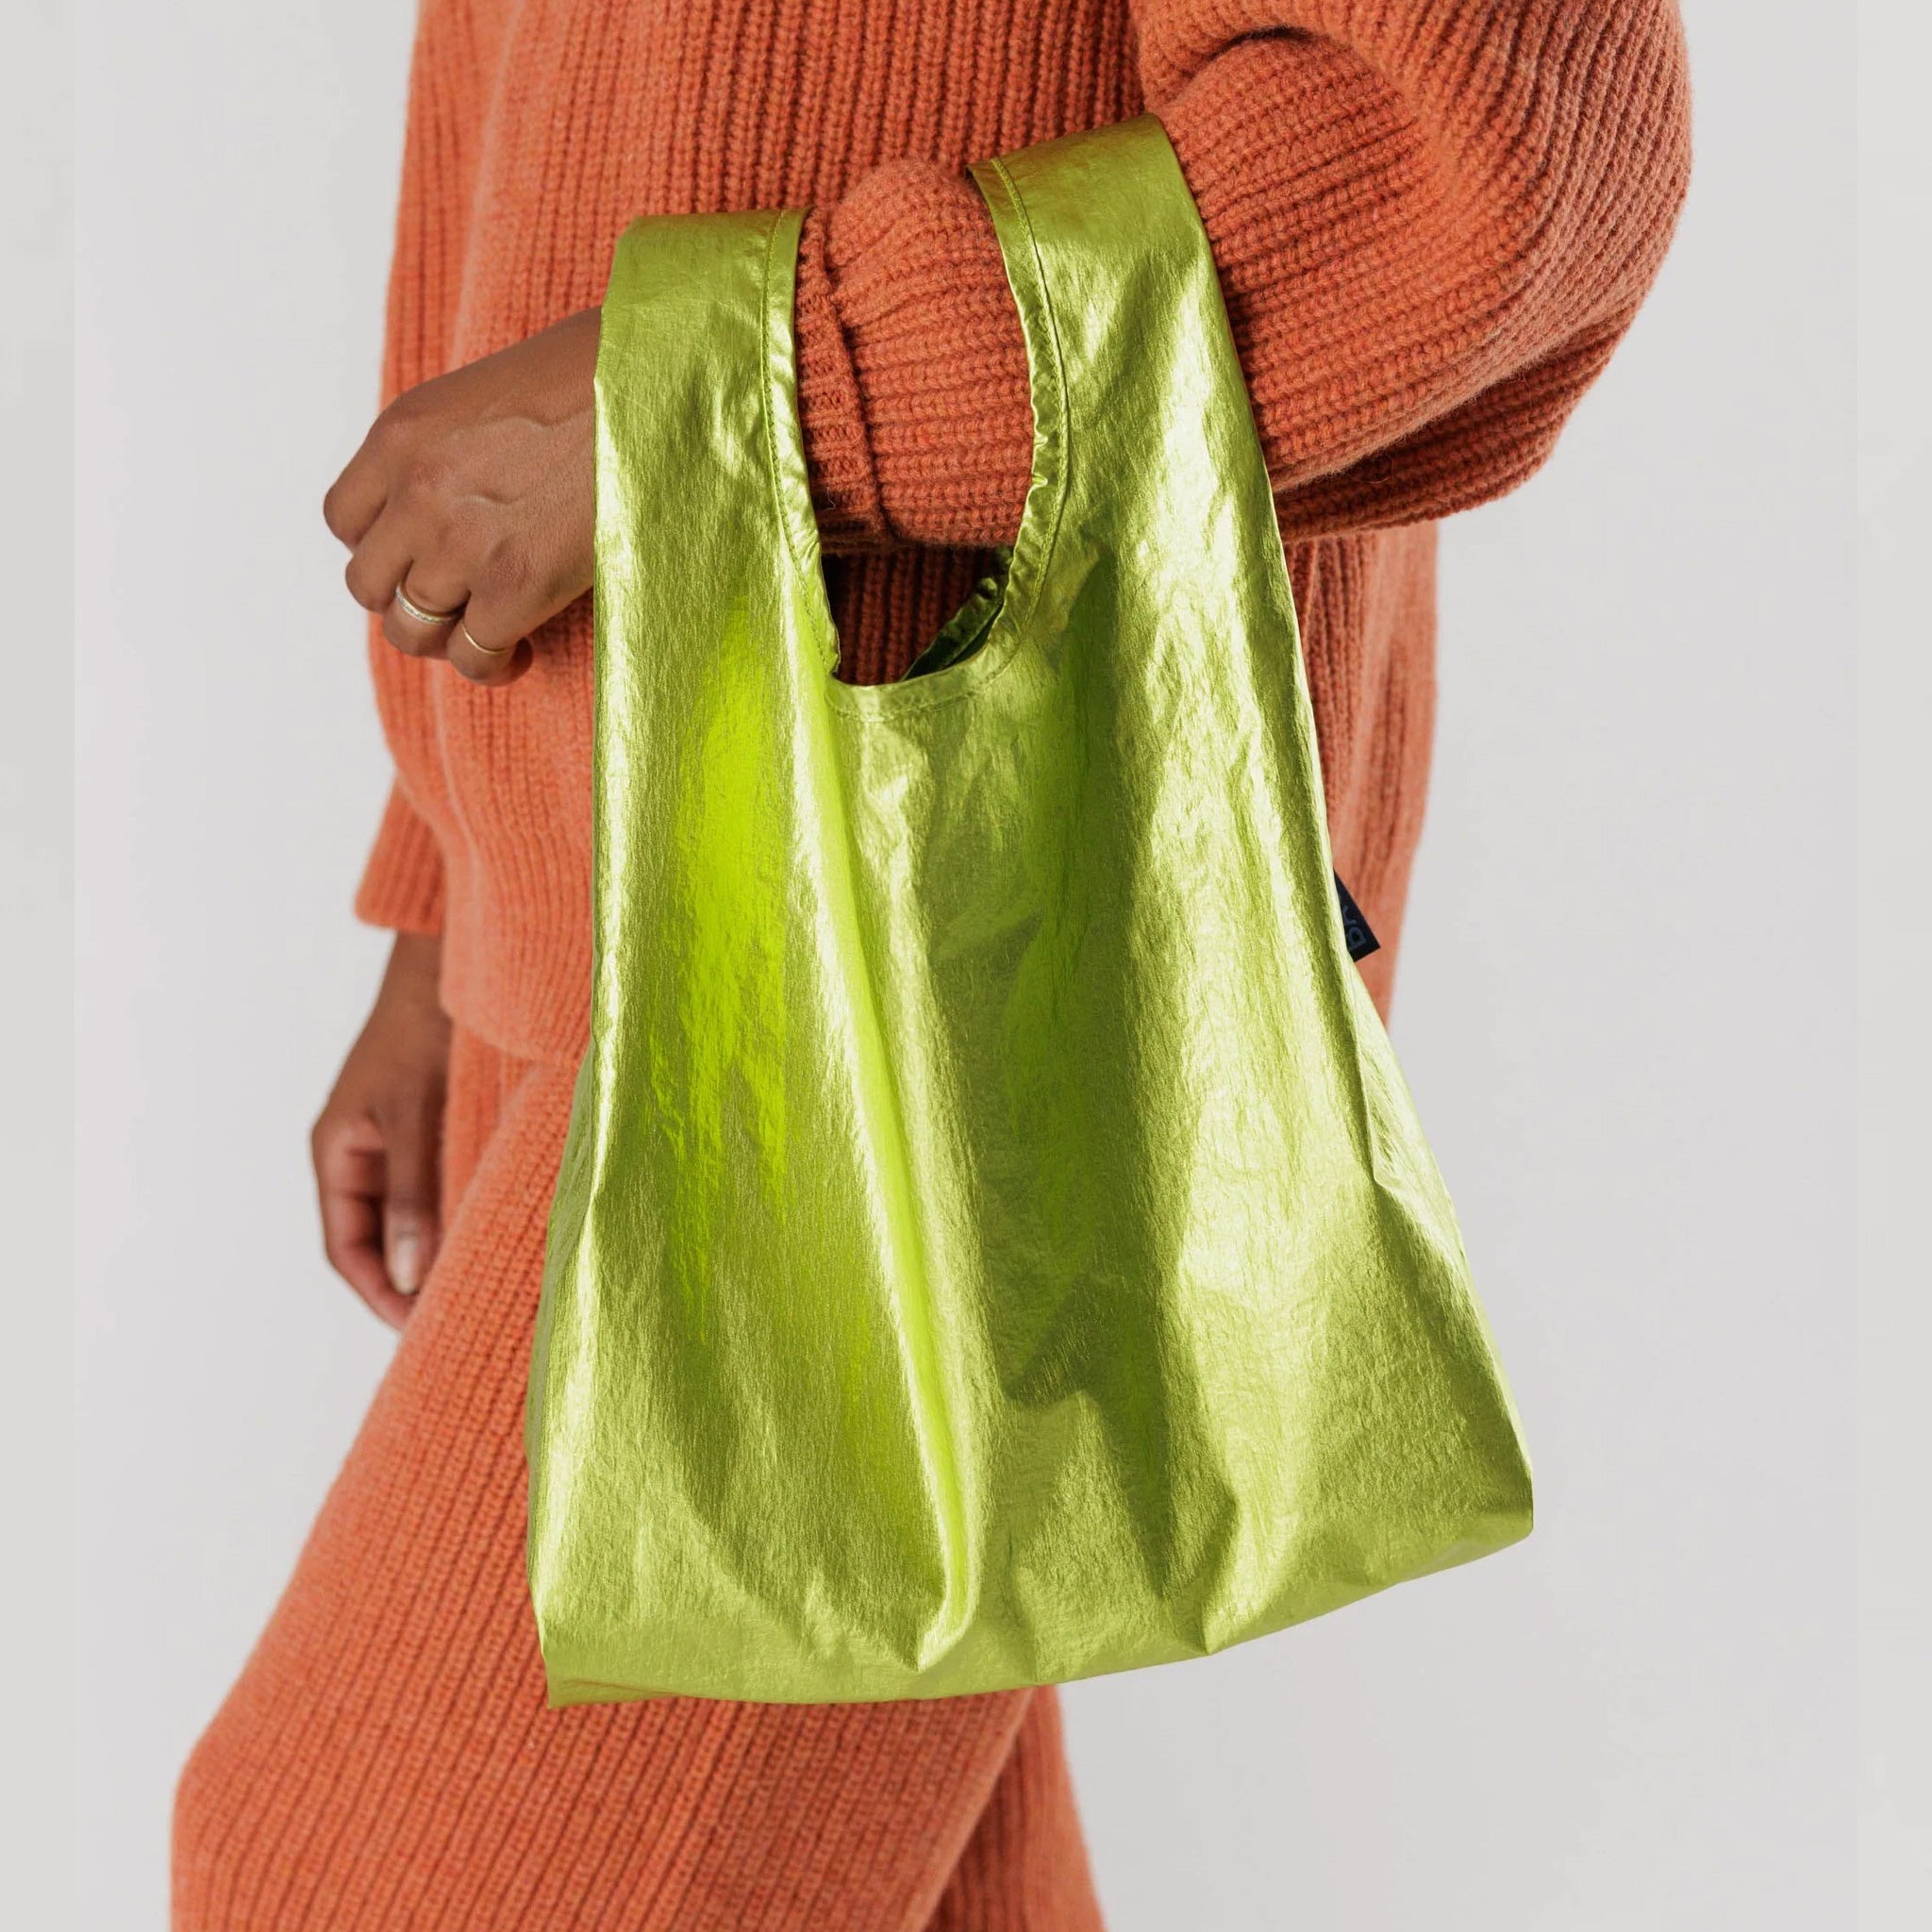 Smaller version of BAGGU's classic reusable nylon tote, in a metallic green color, shown on the arm of a woman wearing orange knits.